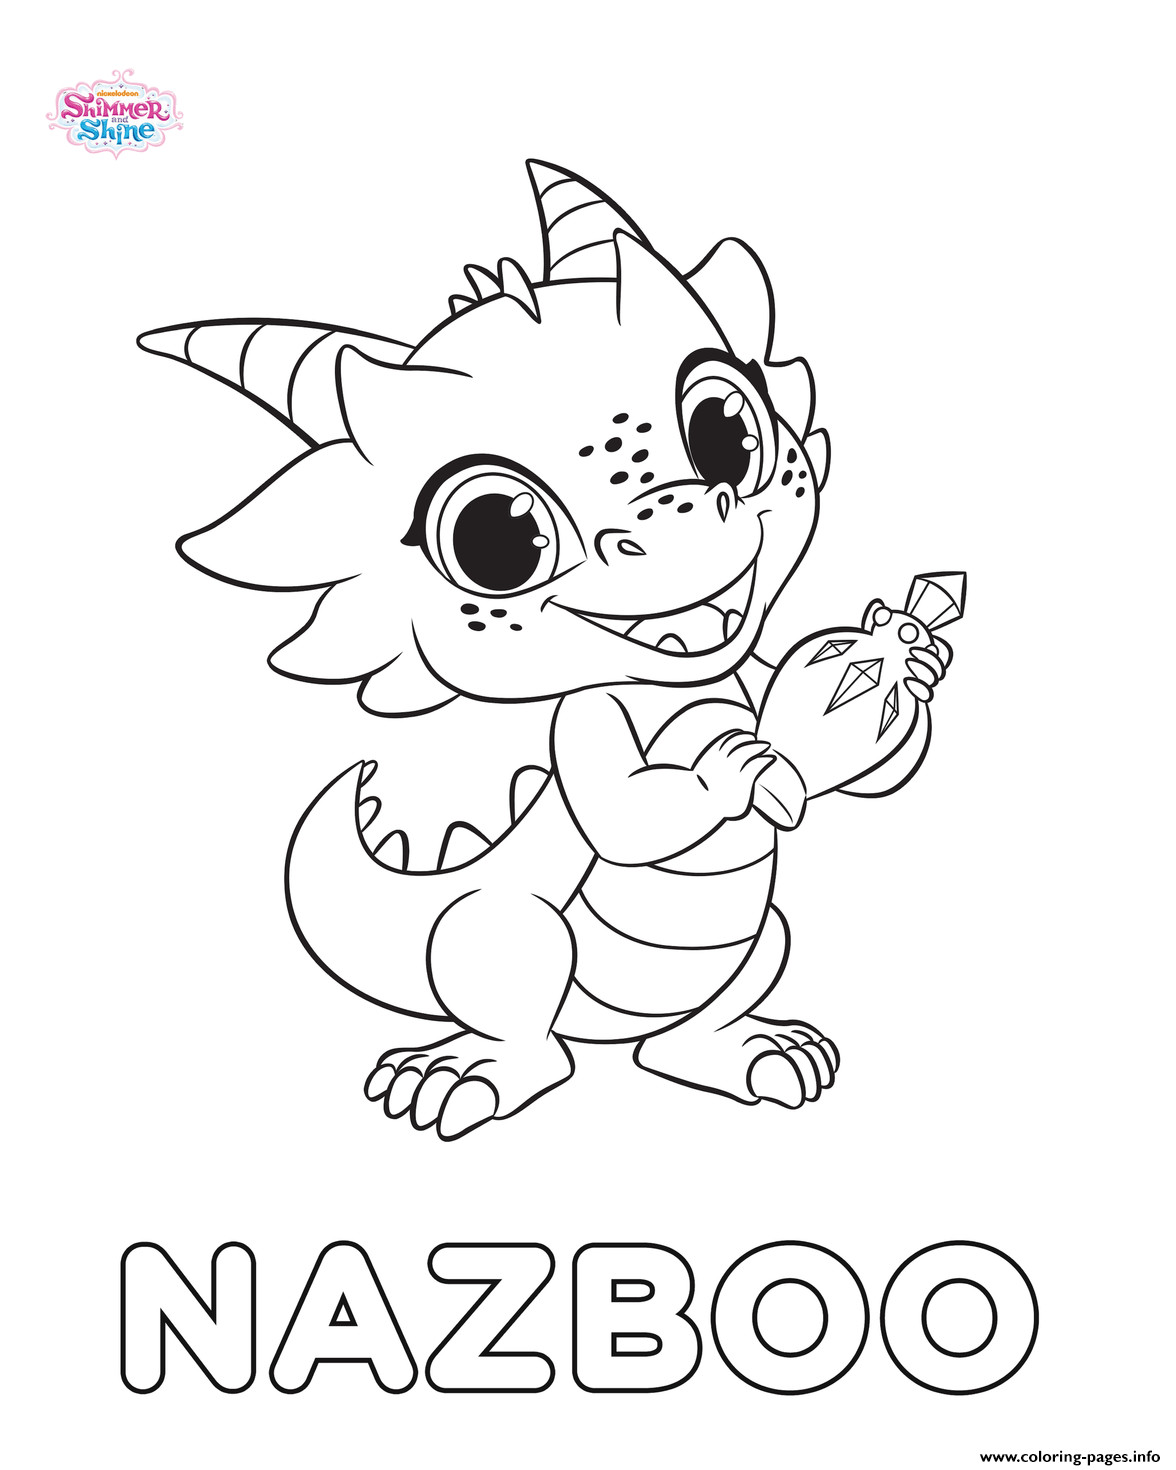 Shimmer And Shine Printable Coloring Pages
 Print Shimmer And Shine Nazboo coloring pages